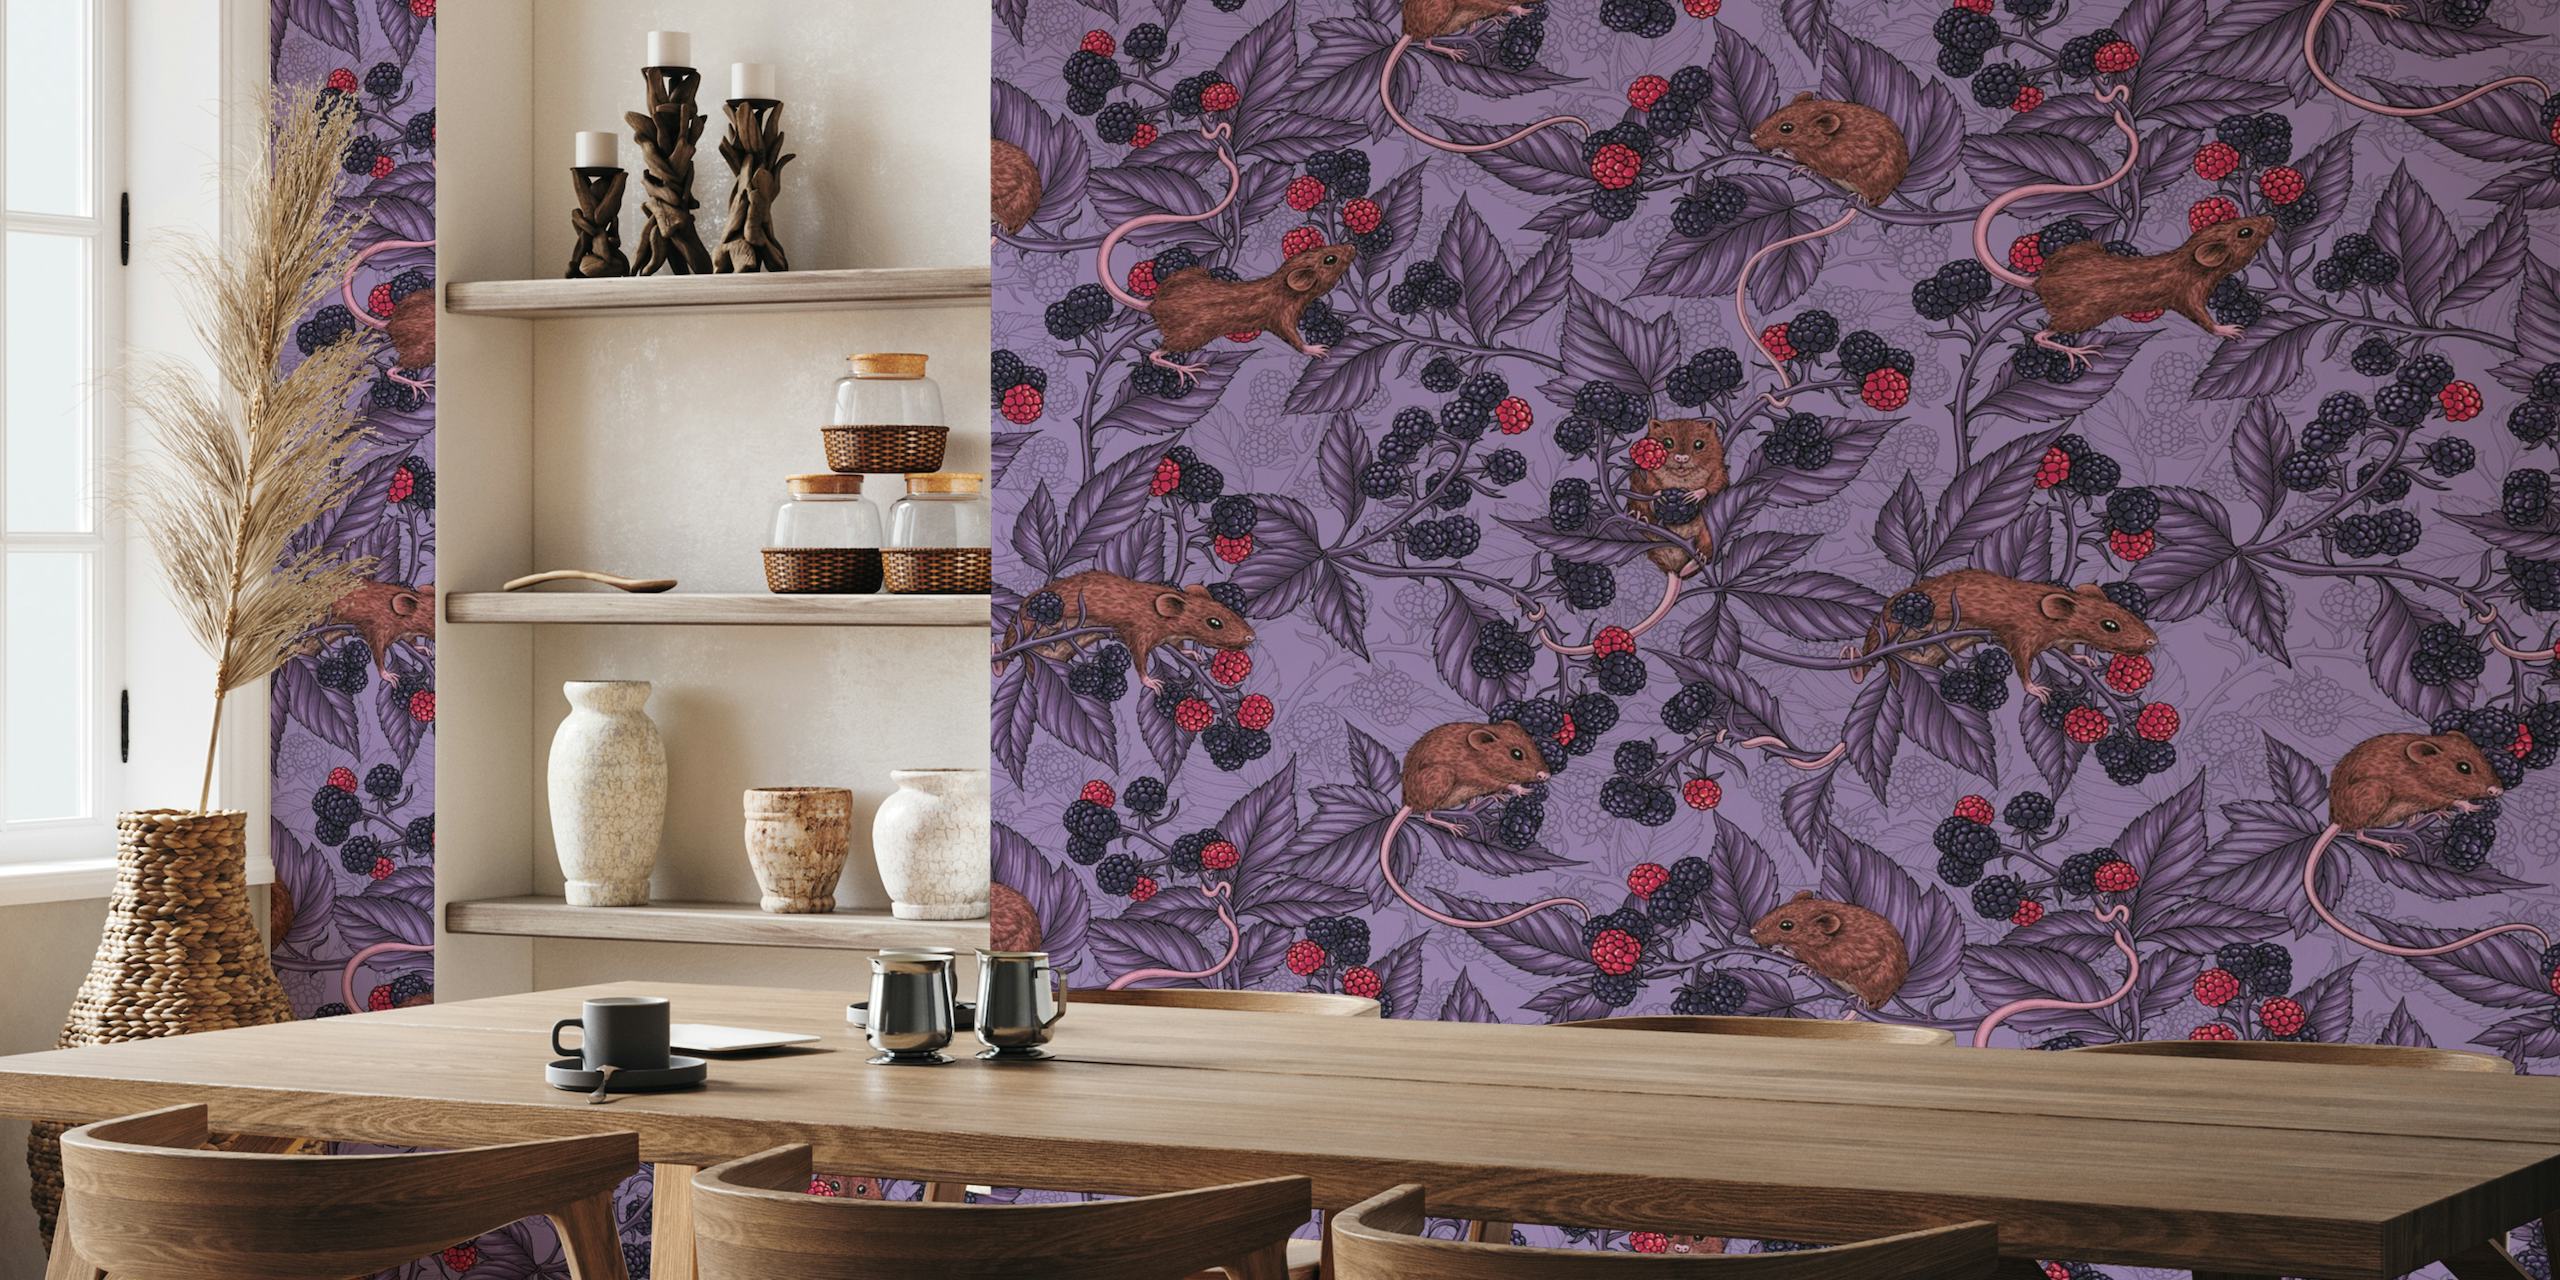 Illustrative wall mural of mice and blackberries on a lavender background